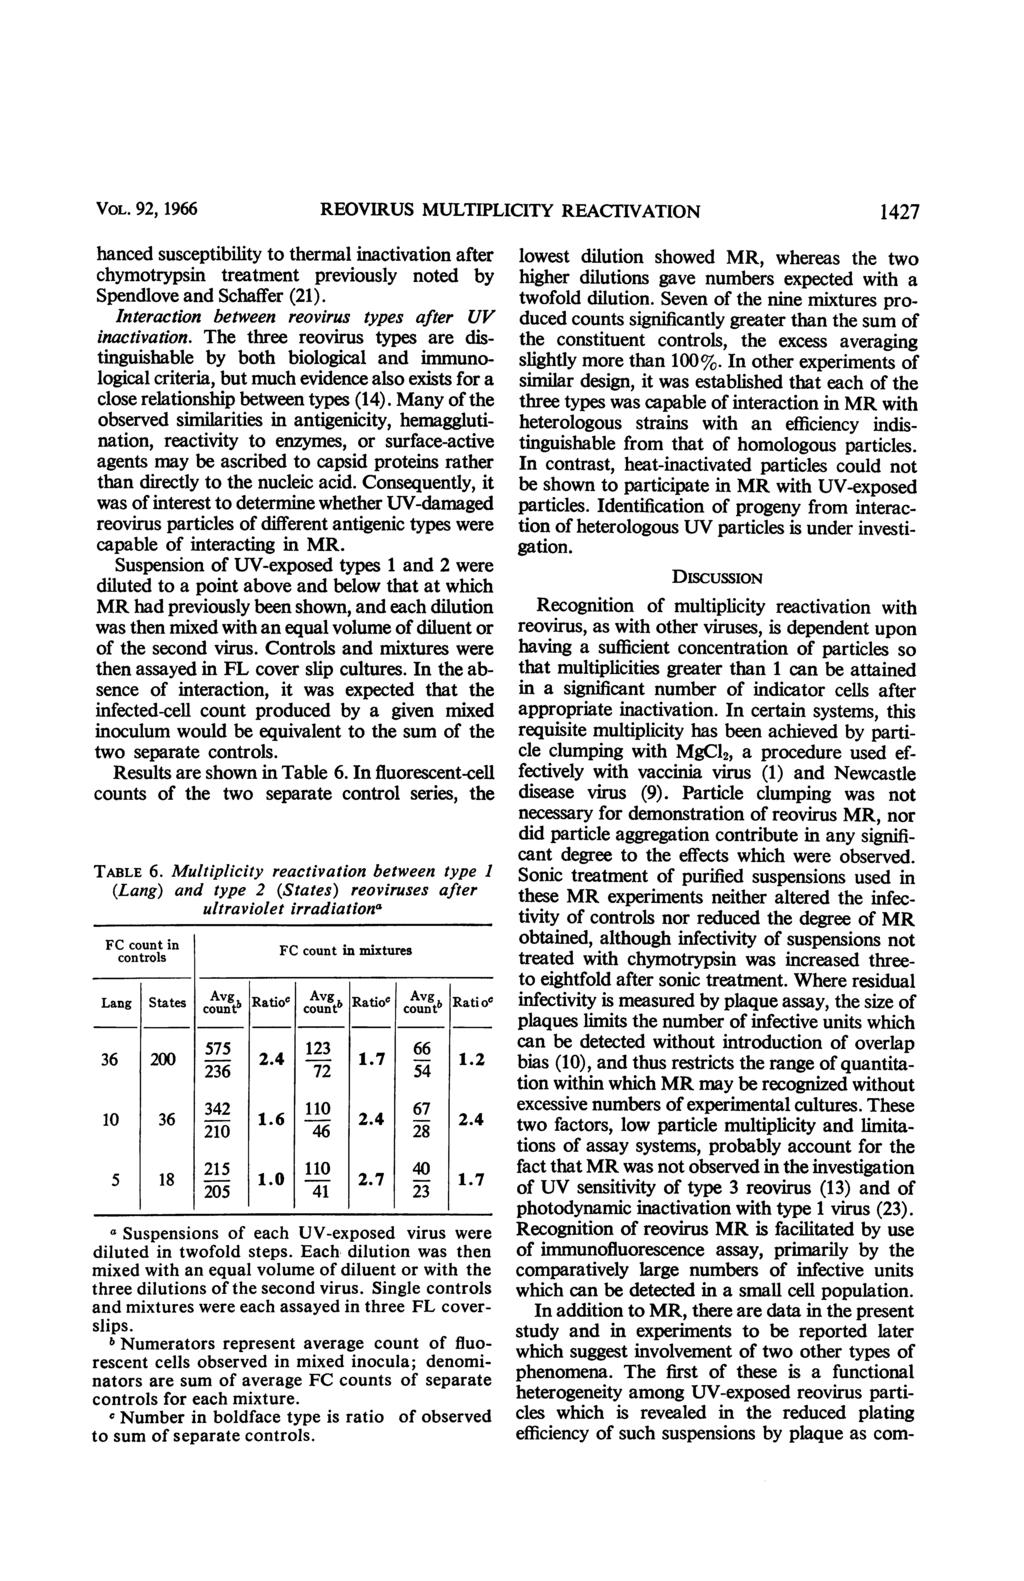 VOL. 92, 1966 REOVIRUS MULTIPLICITY REACTIVATION 1427 hanced susceptibility to thermal inactivation after chymotrypsin treatment previously noted by Spendlove and Schaffer (21).